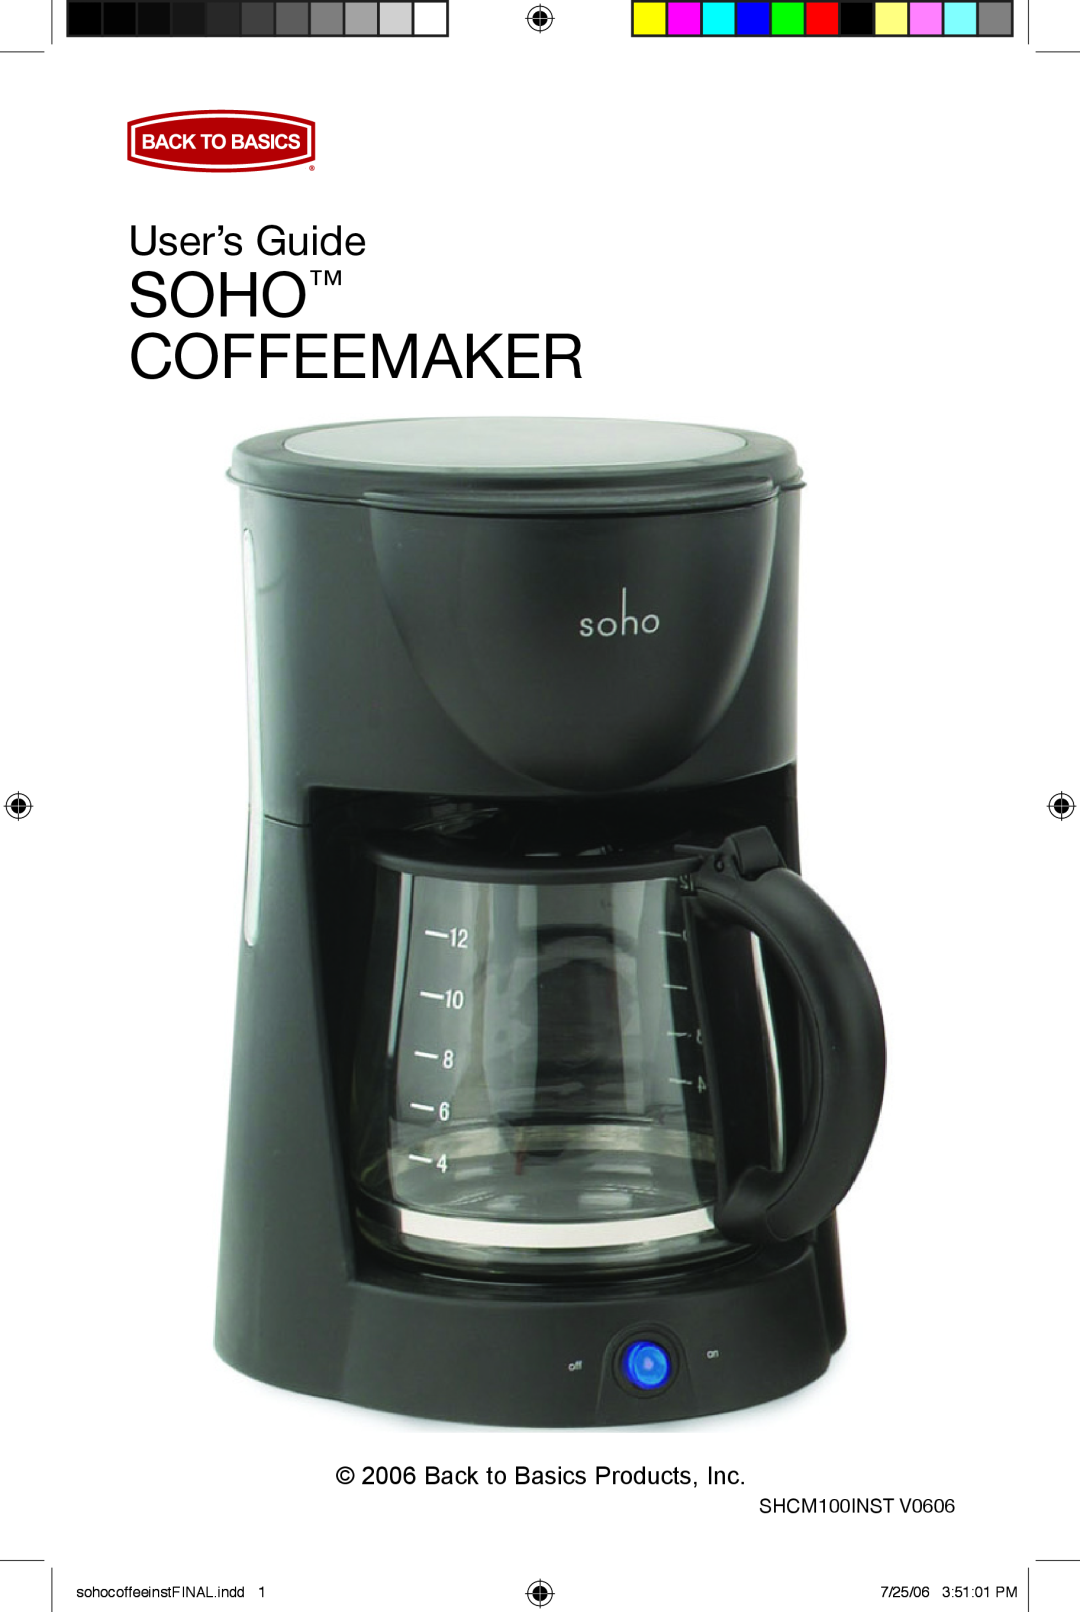 West Bend Back to Basics manual Soho Coffeemaker, User’s Guide, Back to Basics Products, Inc, SHCM100INST 